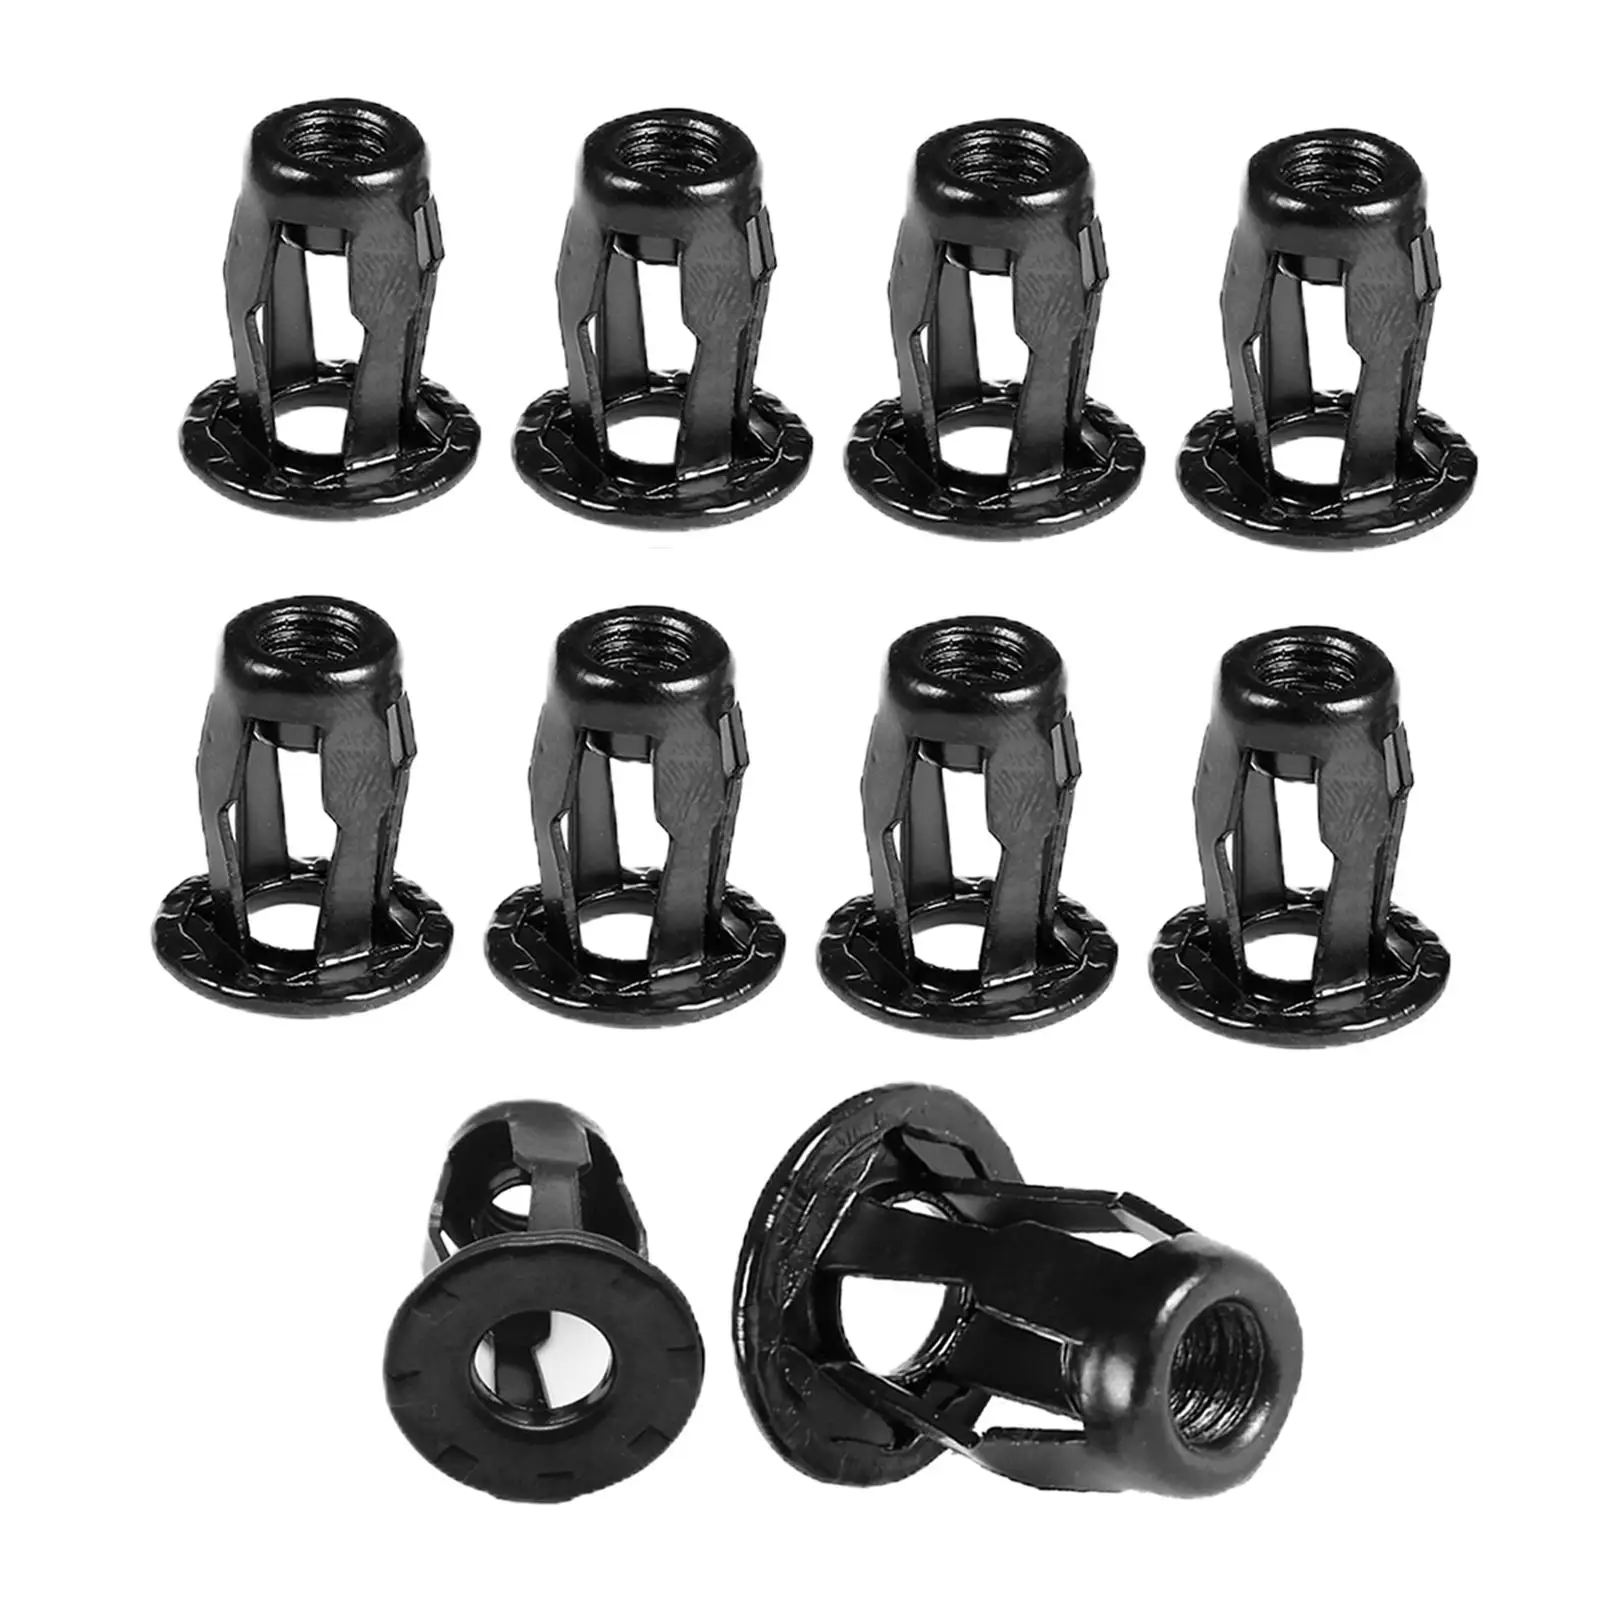 10x Car Screw Base Clamp Trunk Nuts Car Accessories Replacement Front Rear